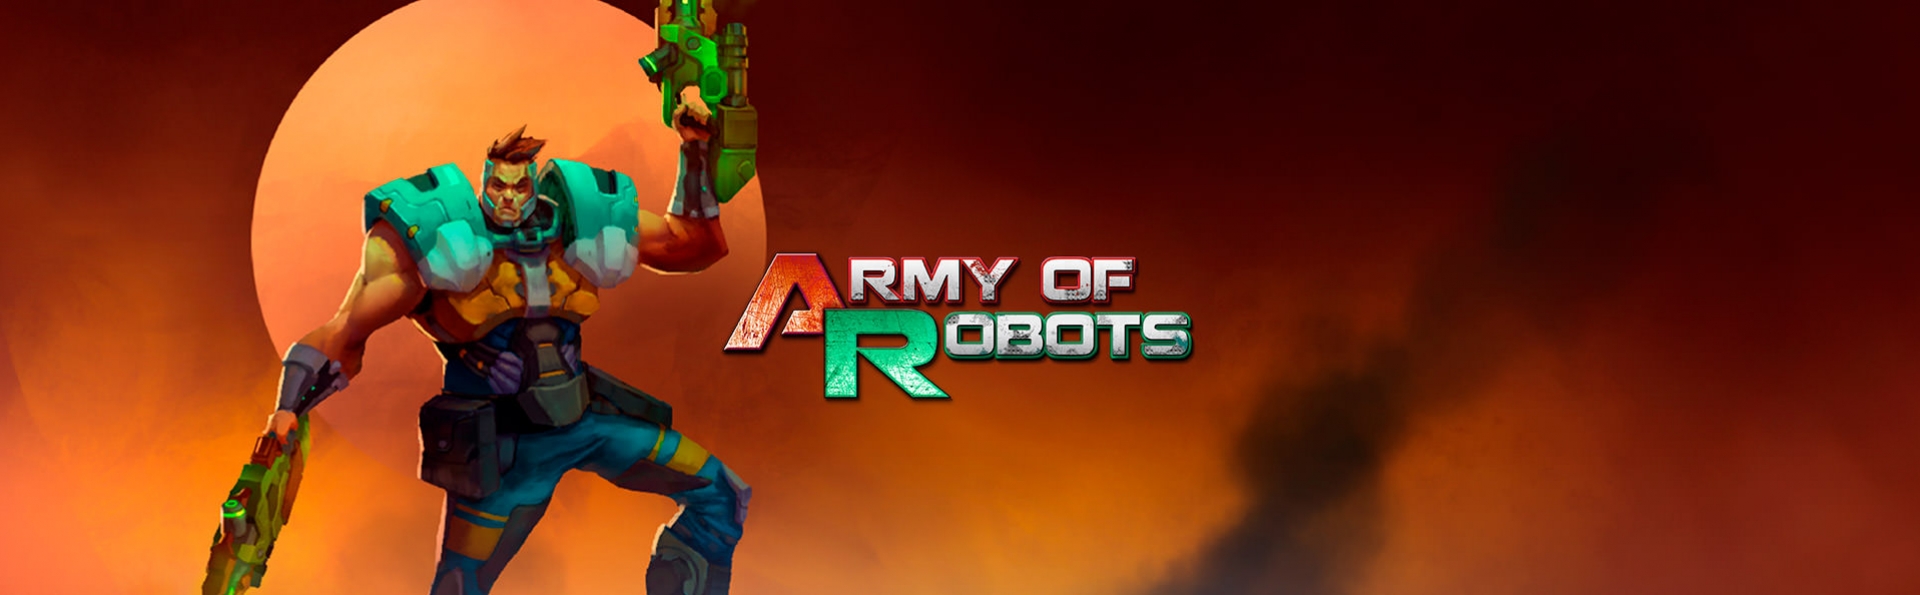 Army of Robots